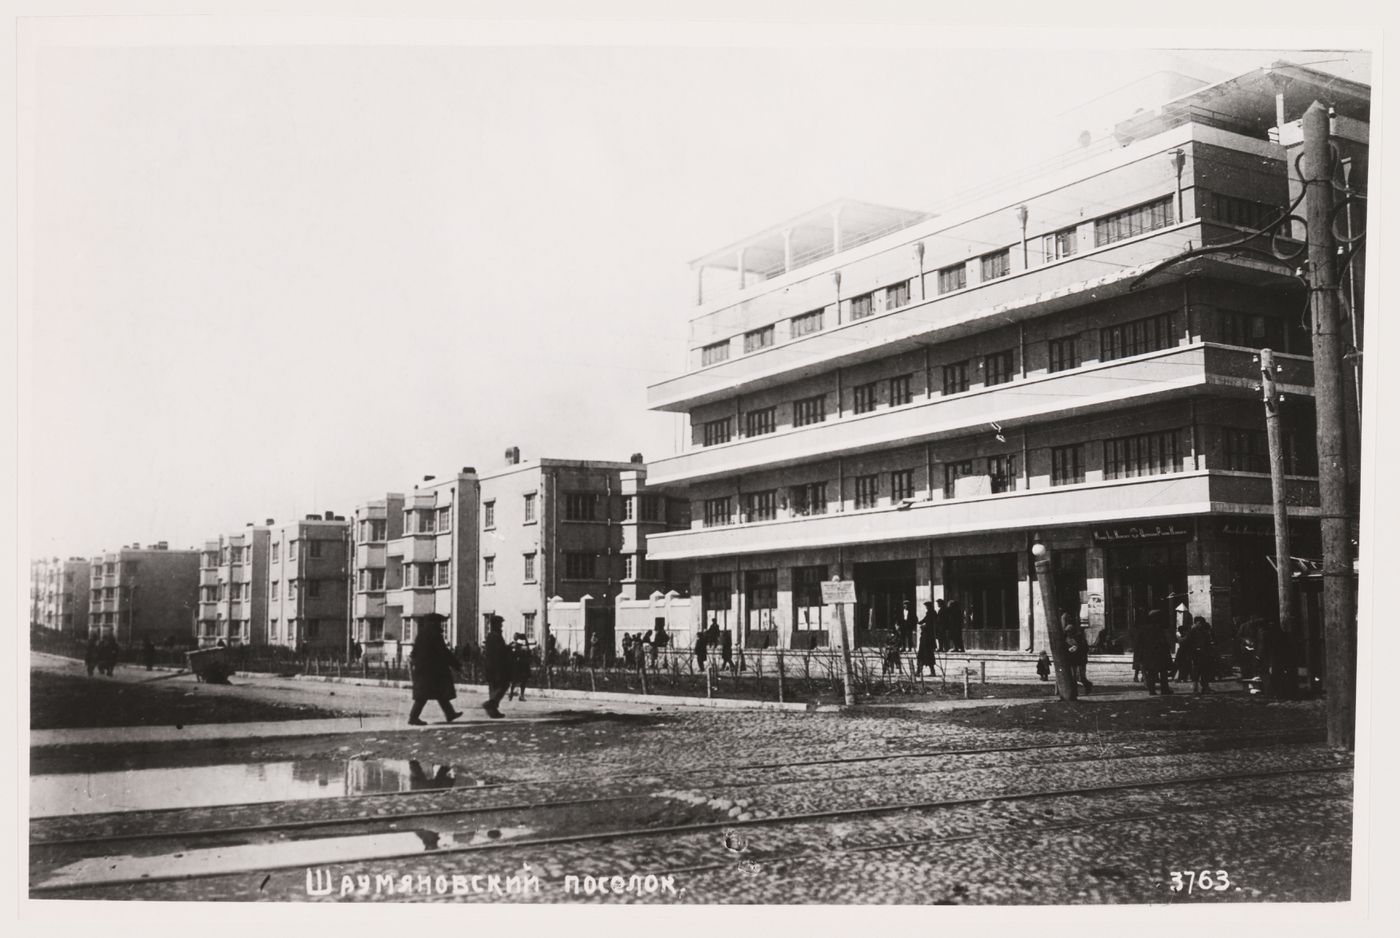 View of a street with housing in the background and a dormitory in the foreground, Armenikend (Shaumian) settlement, Baku, Soviet Union (now in Azerbaijan)